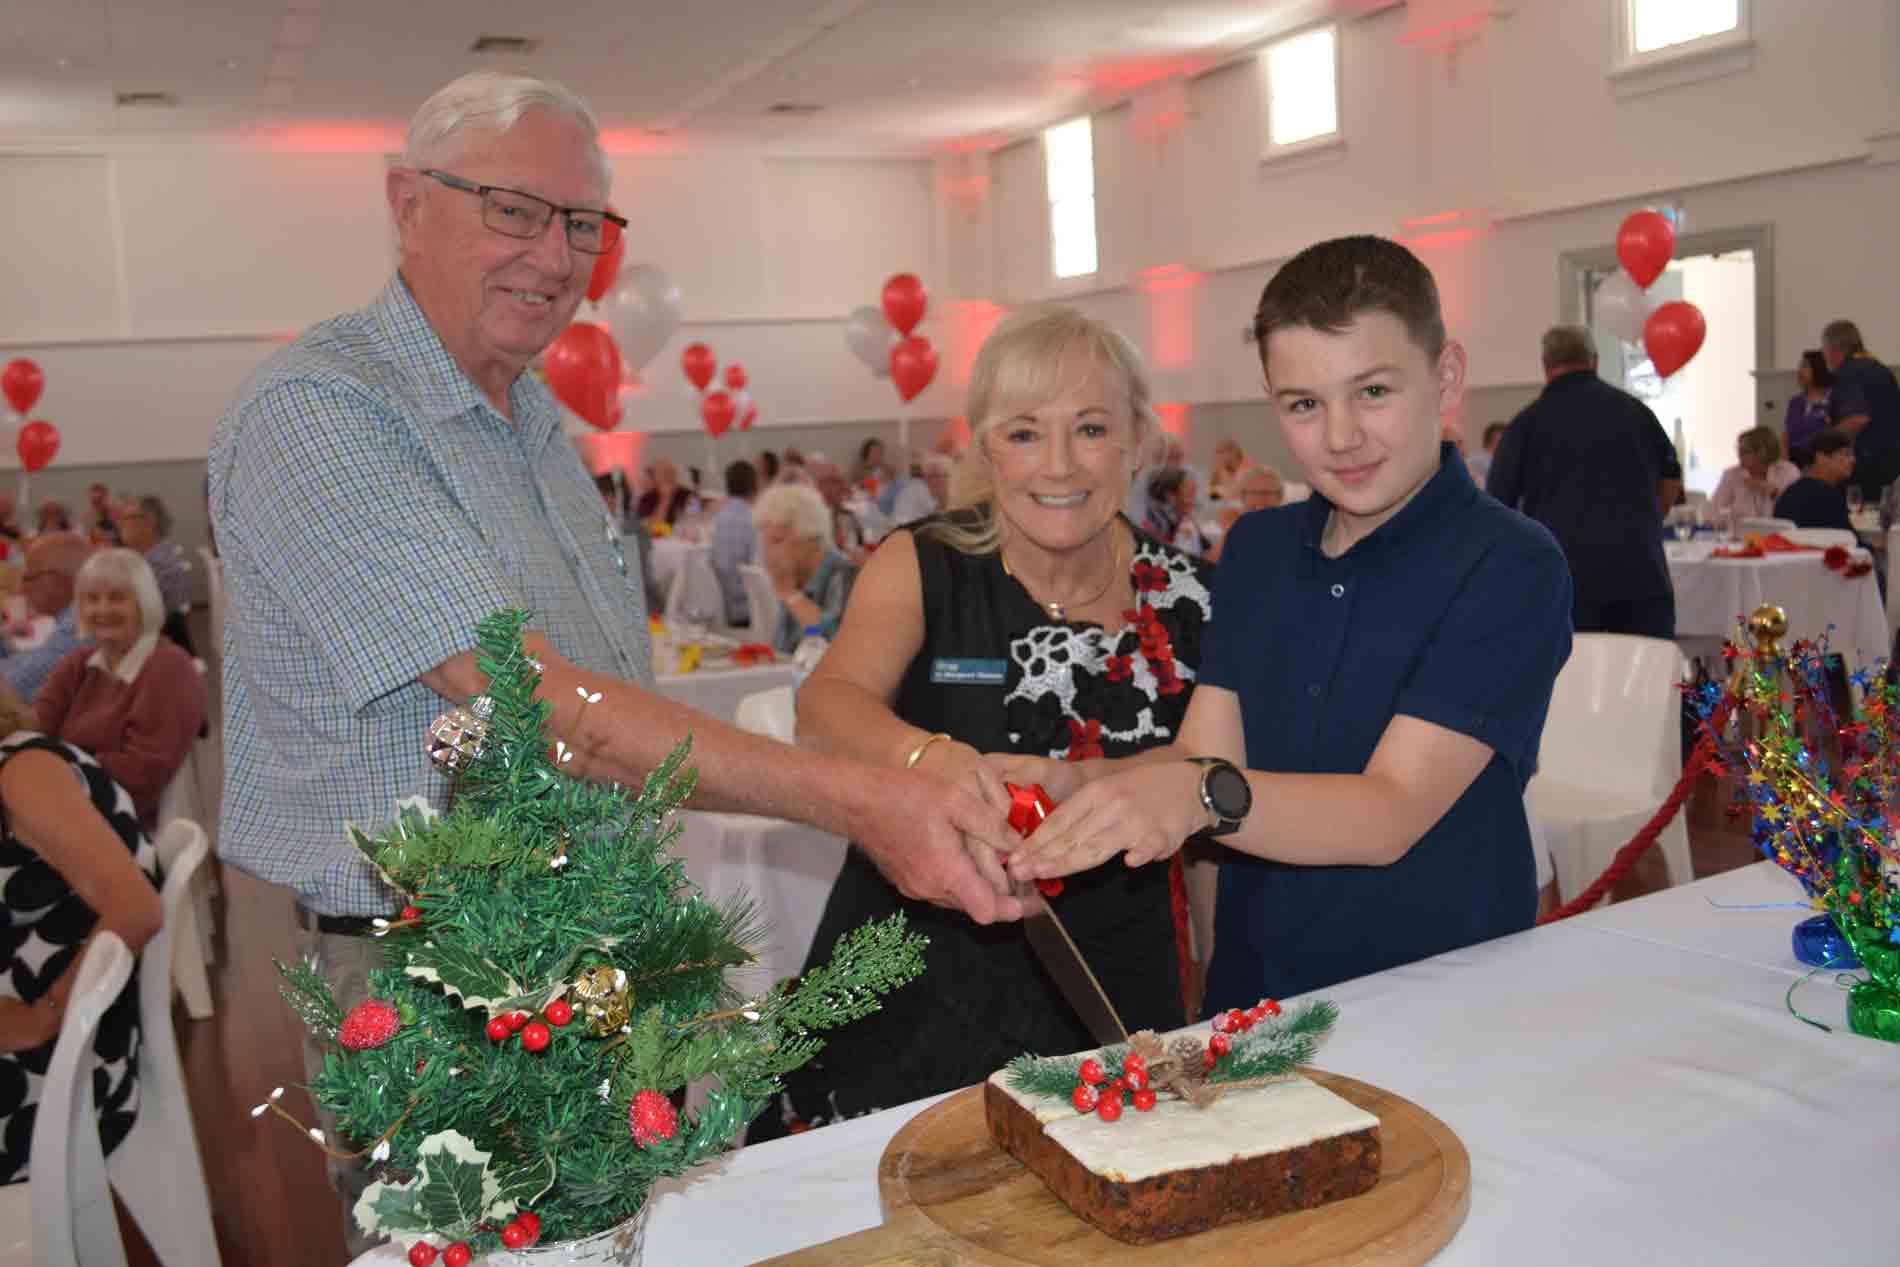 From left Peter Hanson, Mayor Margaret Thomas and Saxon Marrell cutting the 2020 Thank a Volunteer Day cake